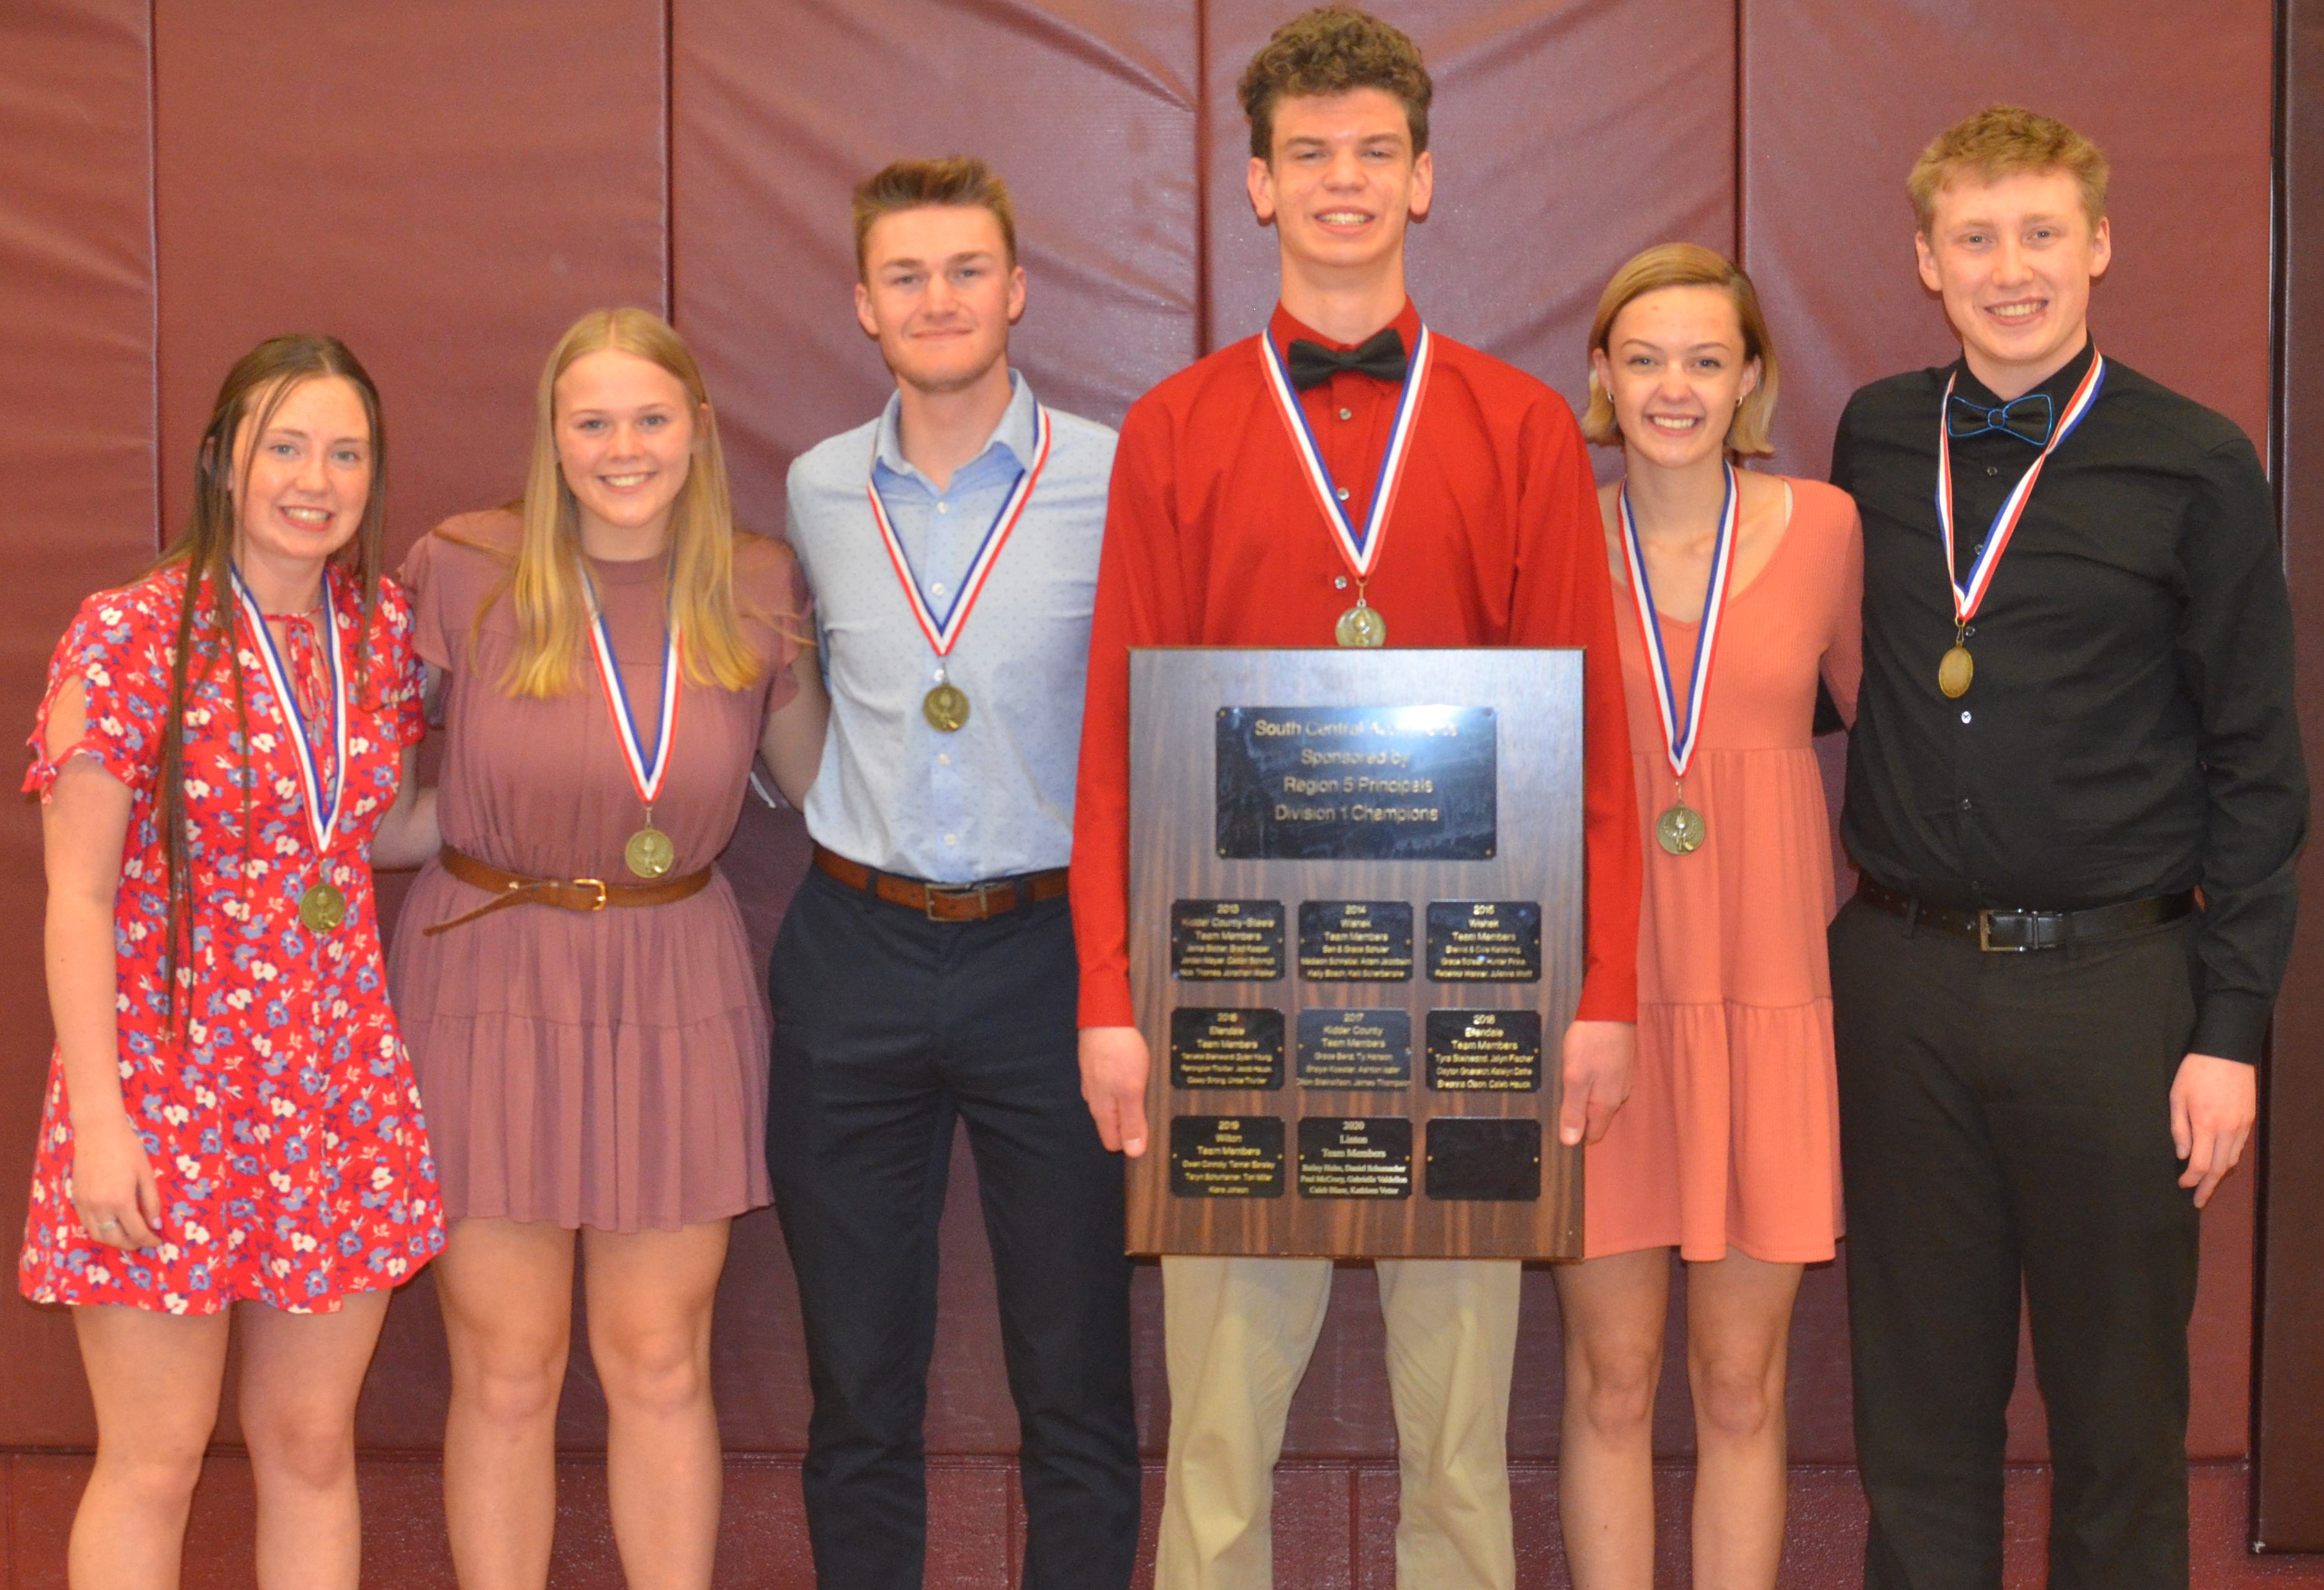 Local students show out at Region V Acalypmpics